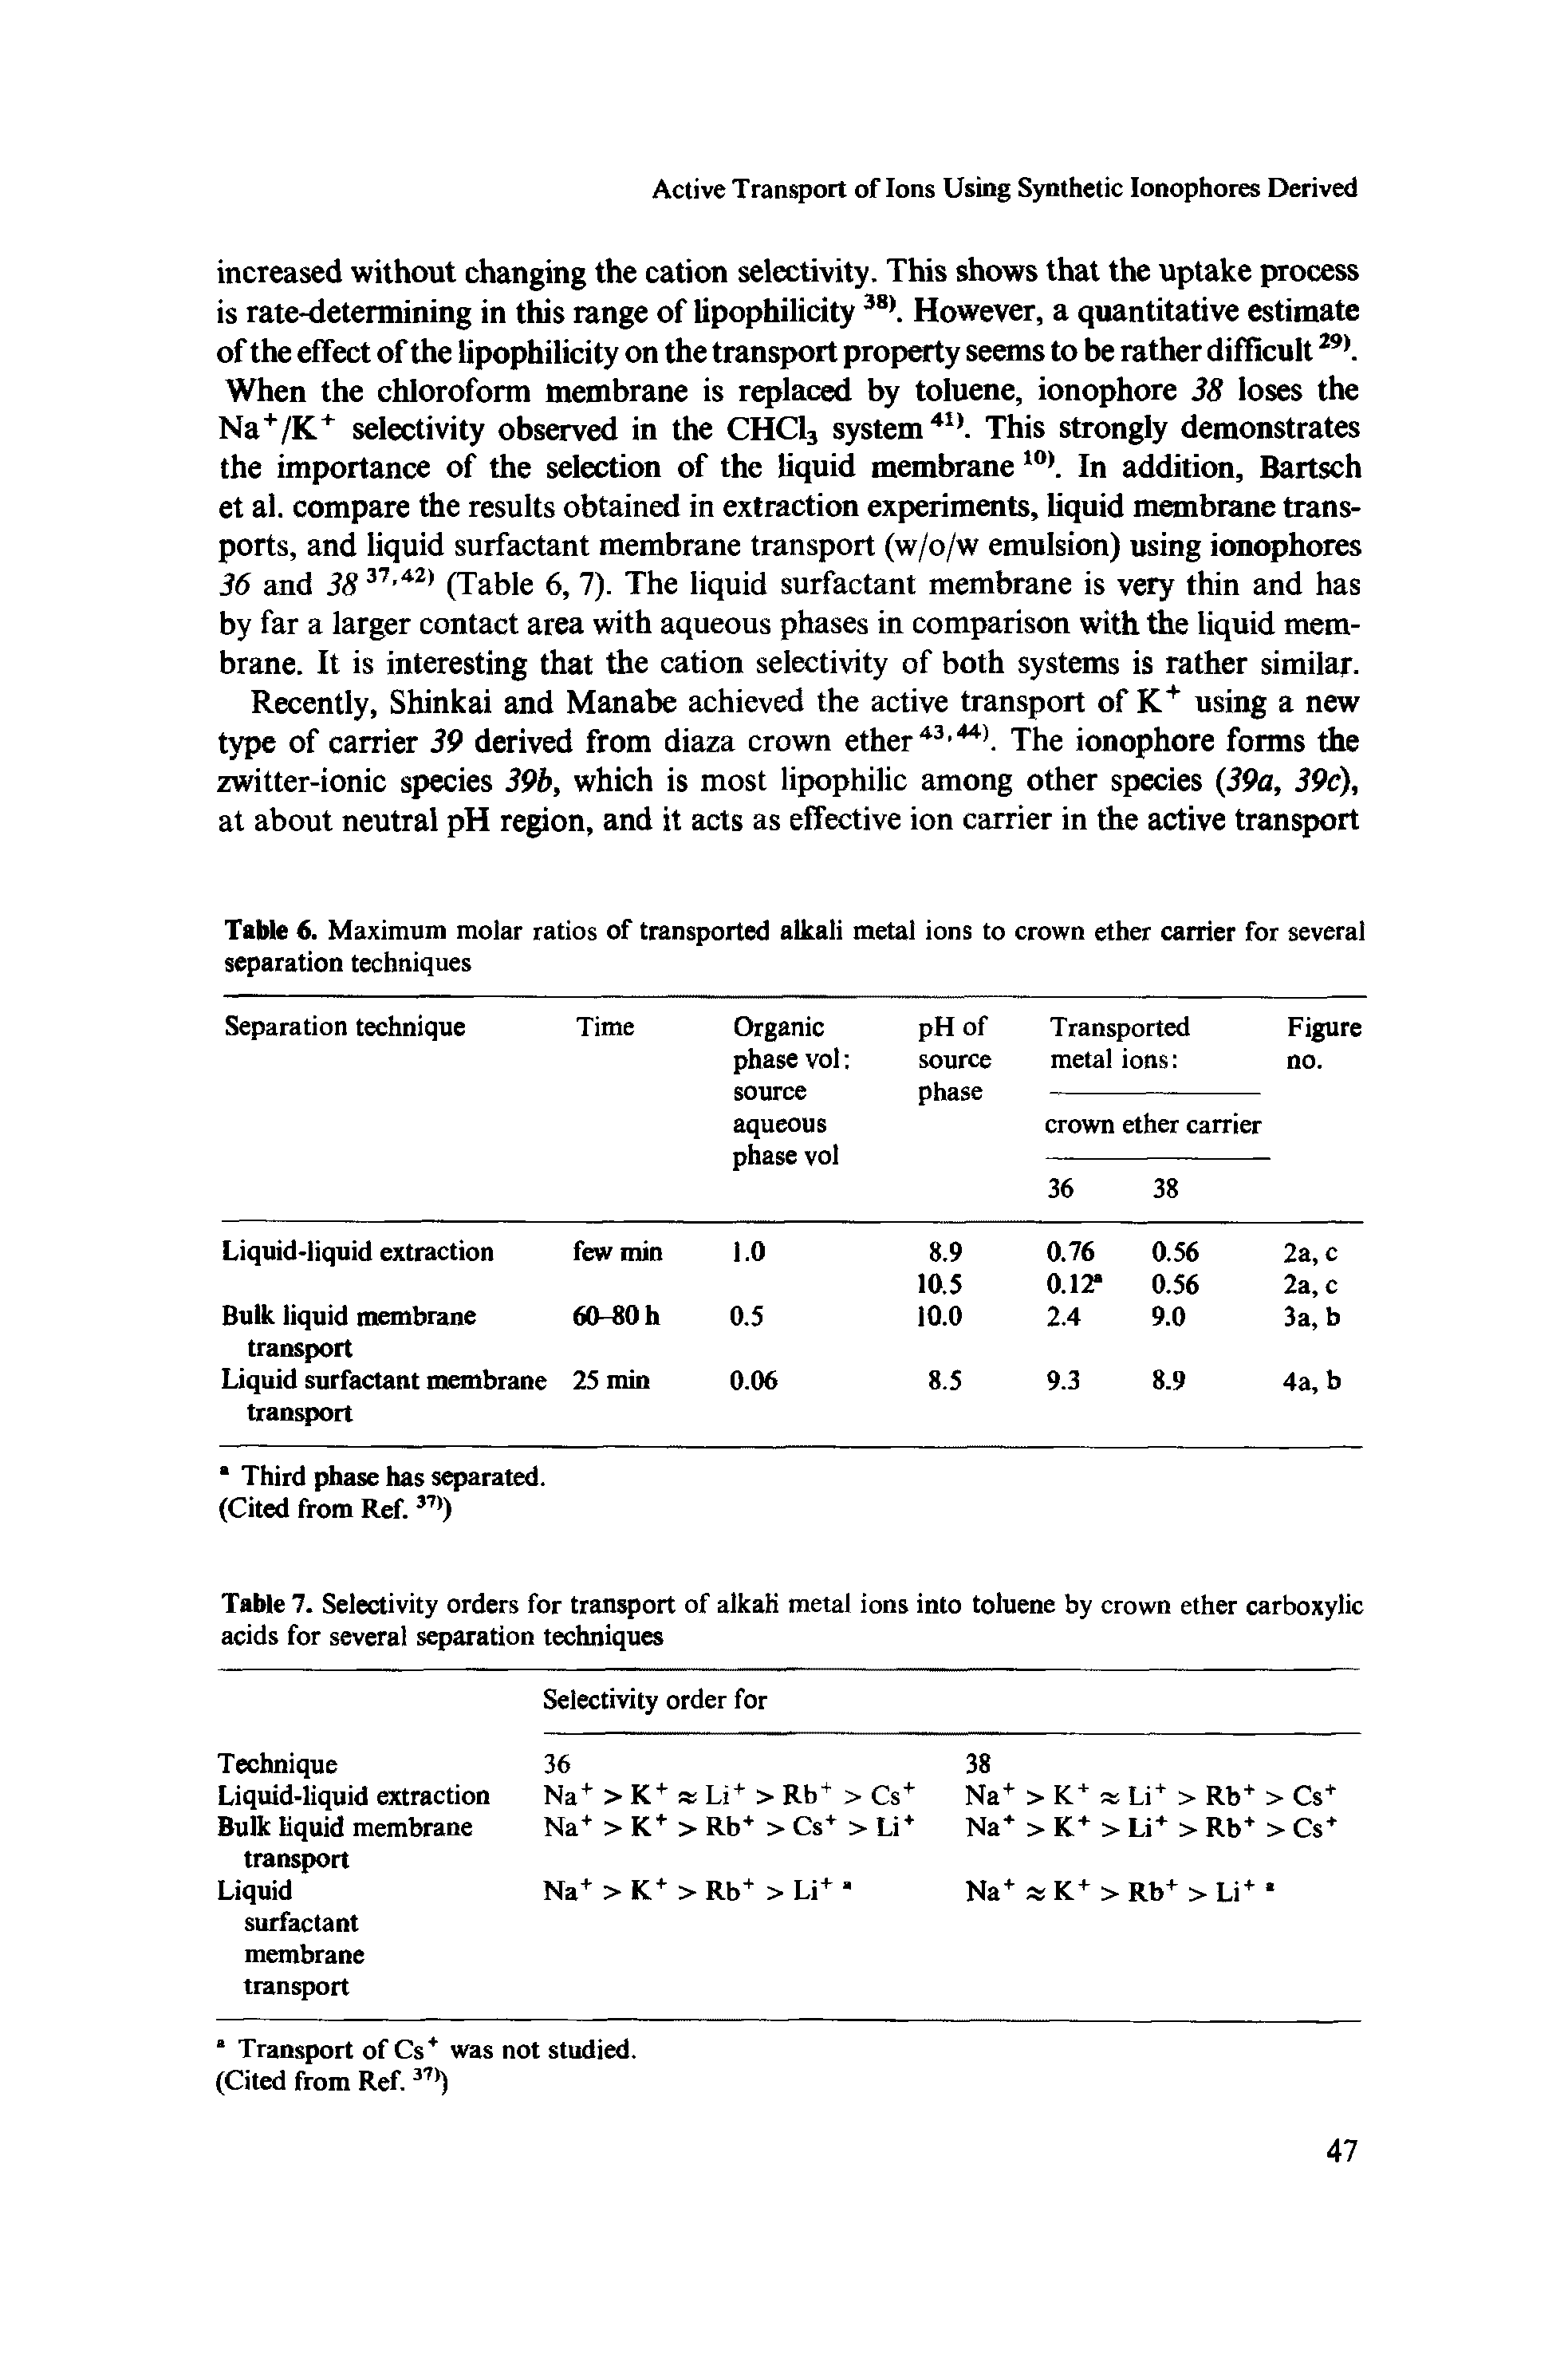 Table 7. Selectivity orders for transport of alkali metal ions into toluene by crown ether carboxylic acids for several separation techniques...